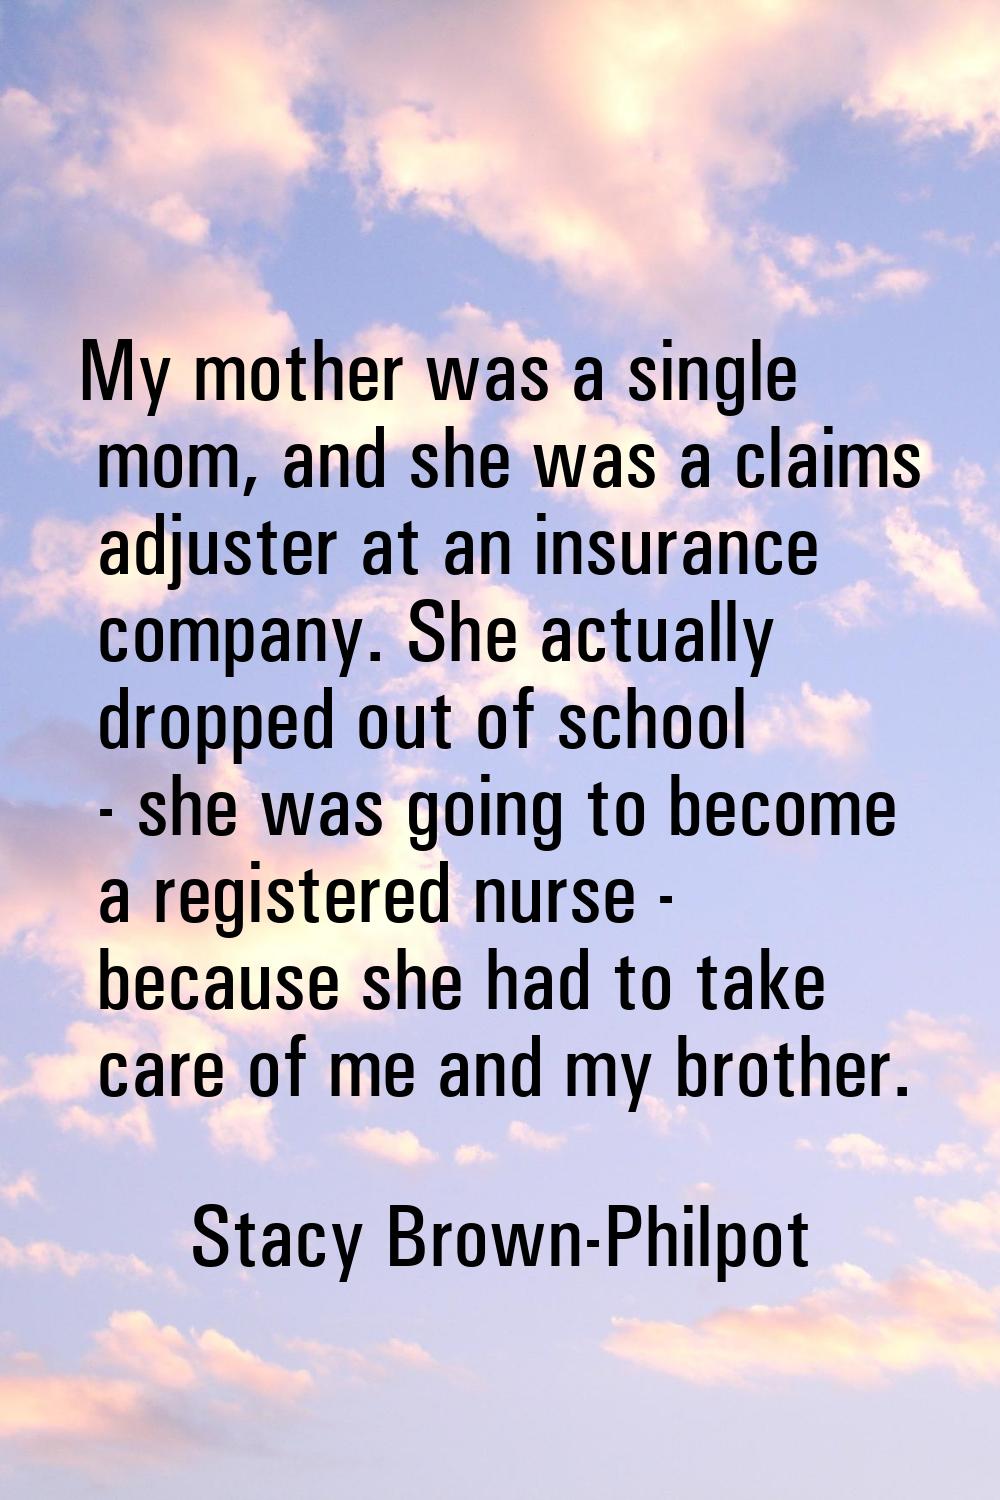 My mother was a single mom, and she was a claims adjuster at an insurance company. She actually dro